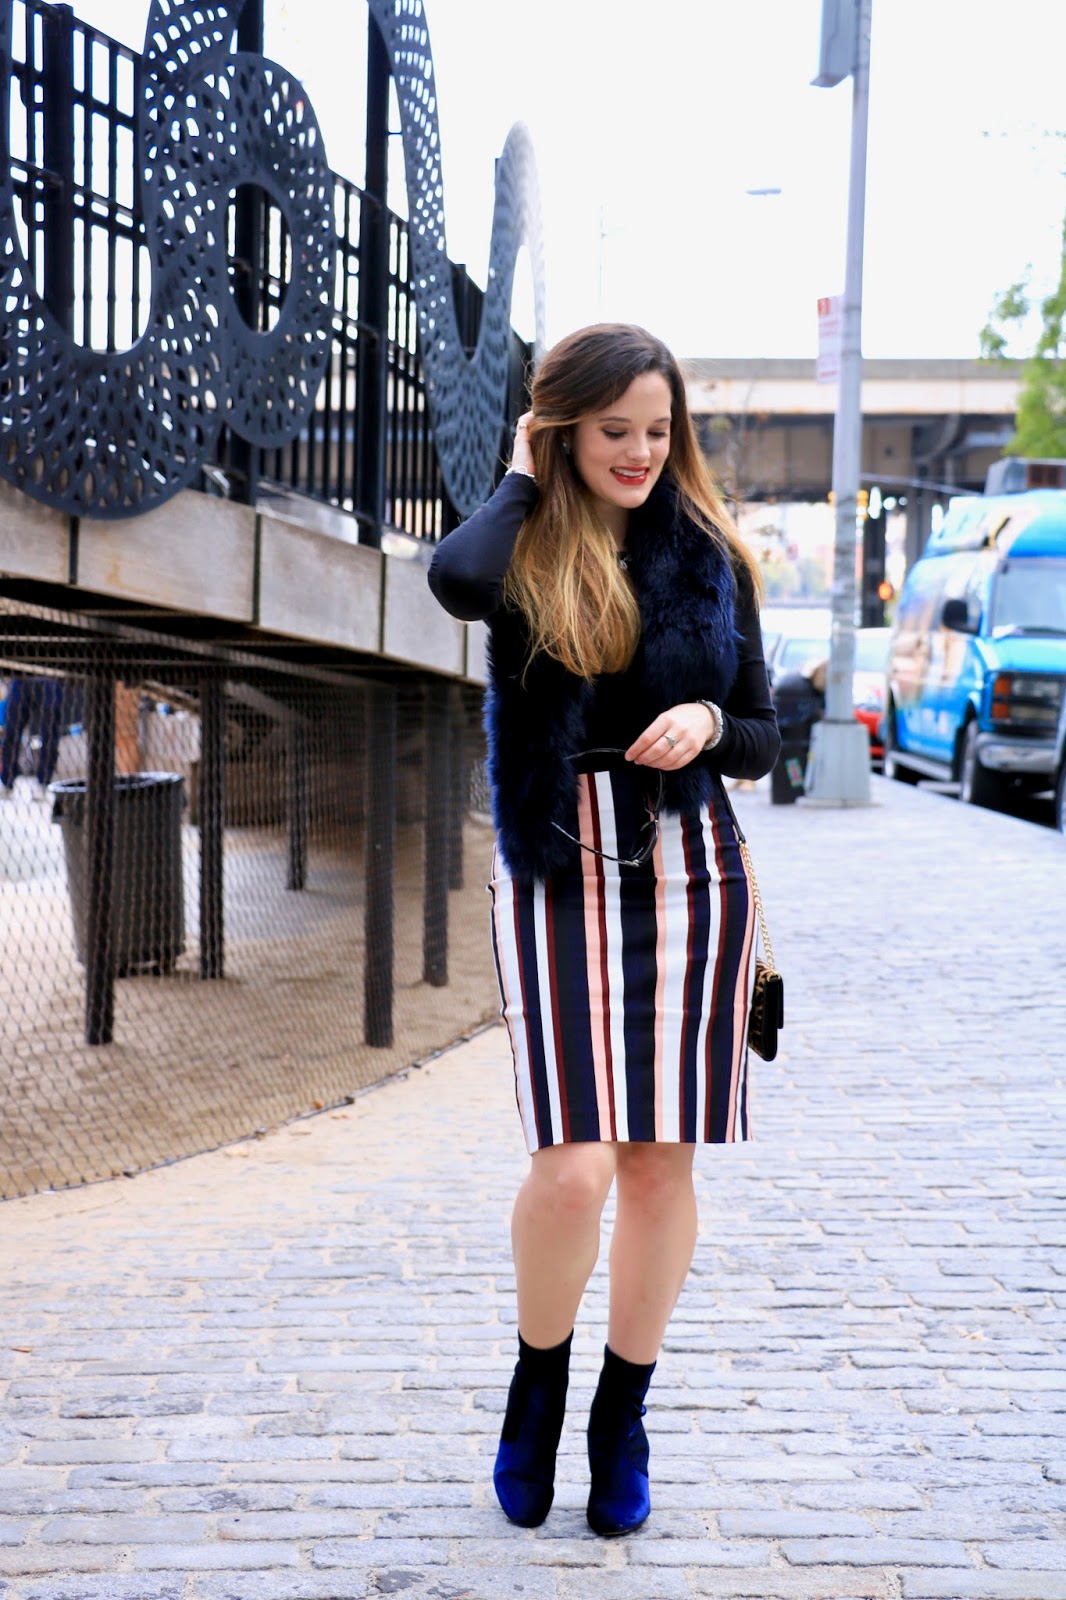 Nyc fashion blogger Kathleen Harper's party outfit ideas